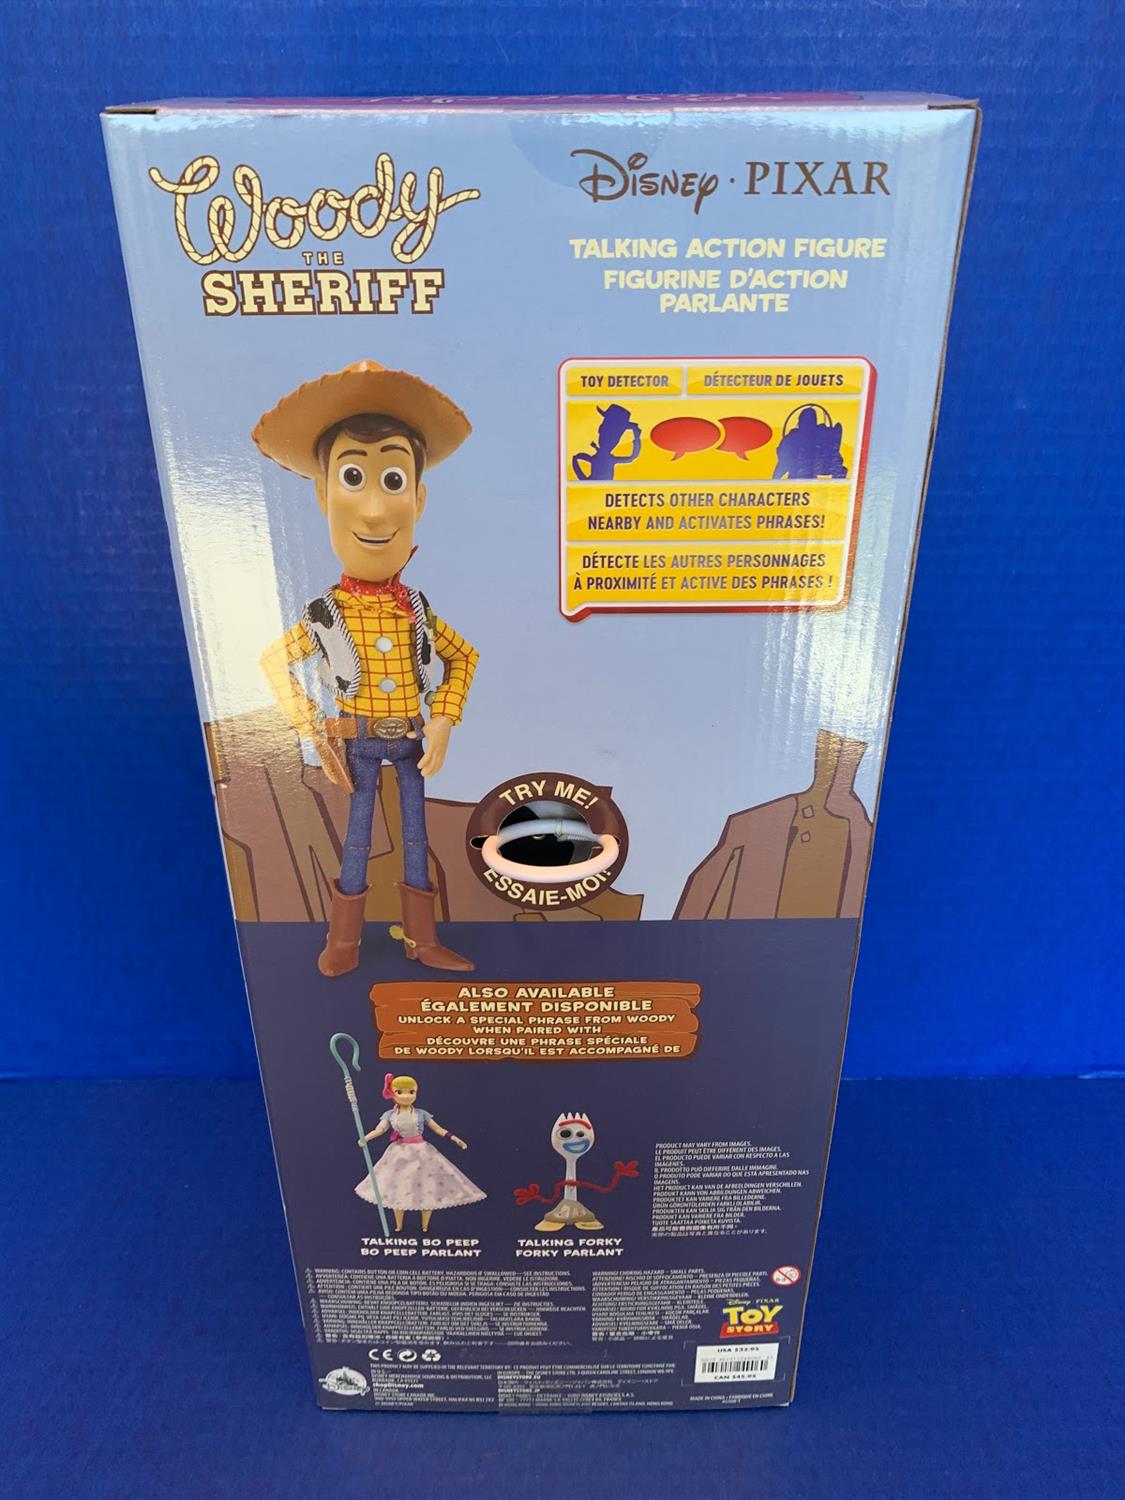 woody doll jcpenney